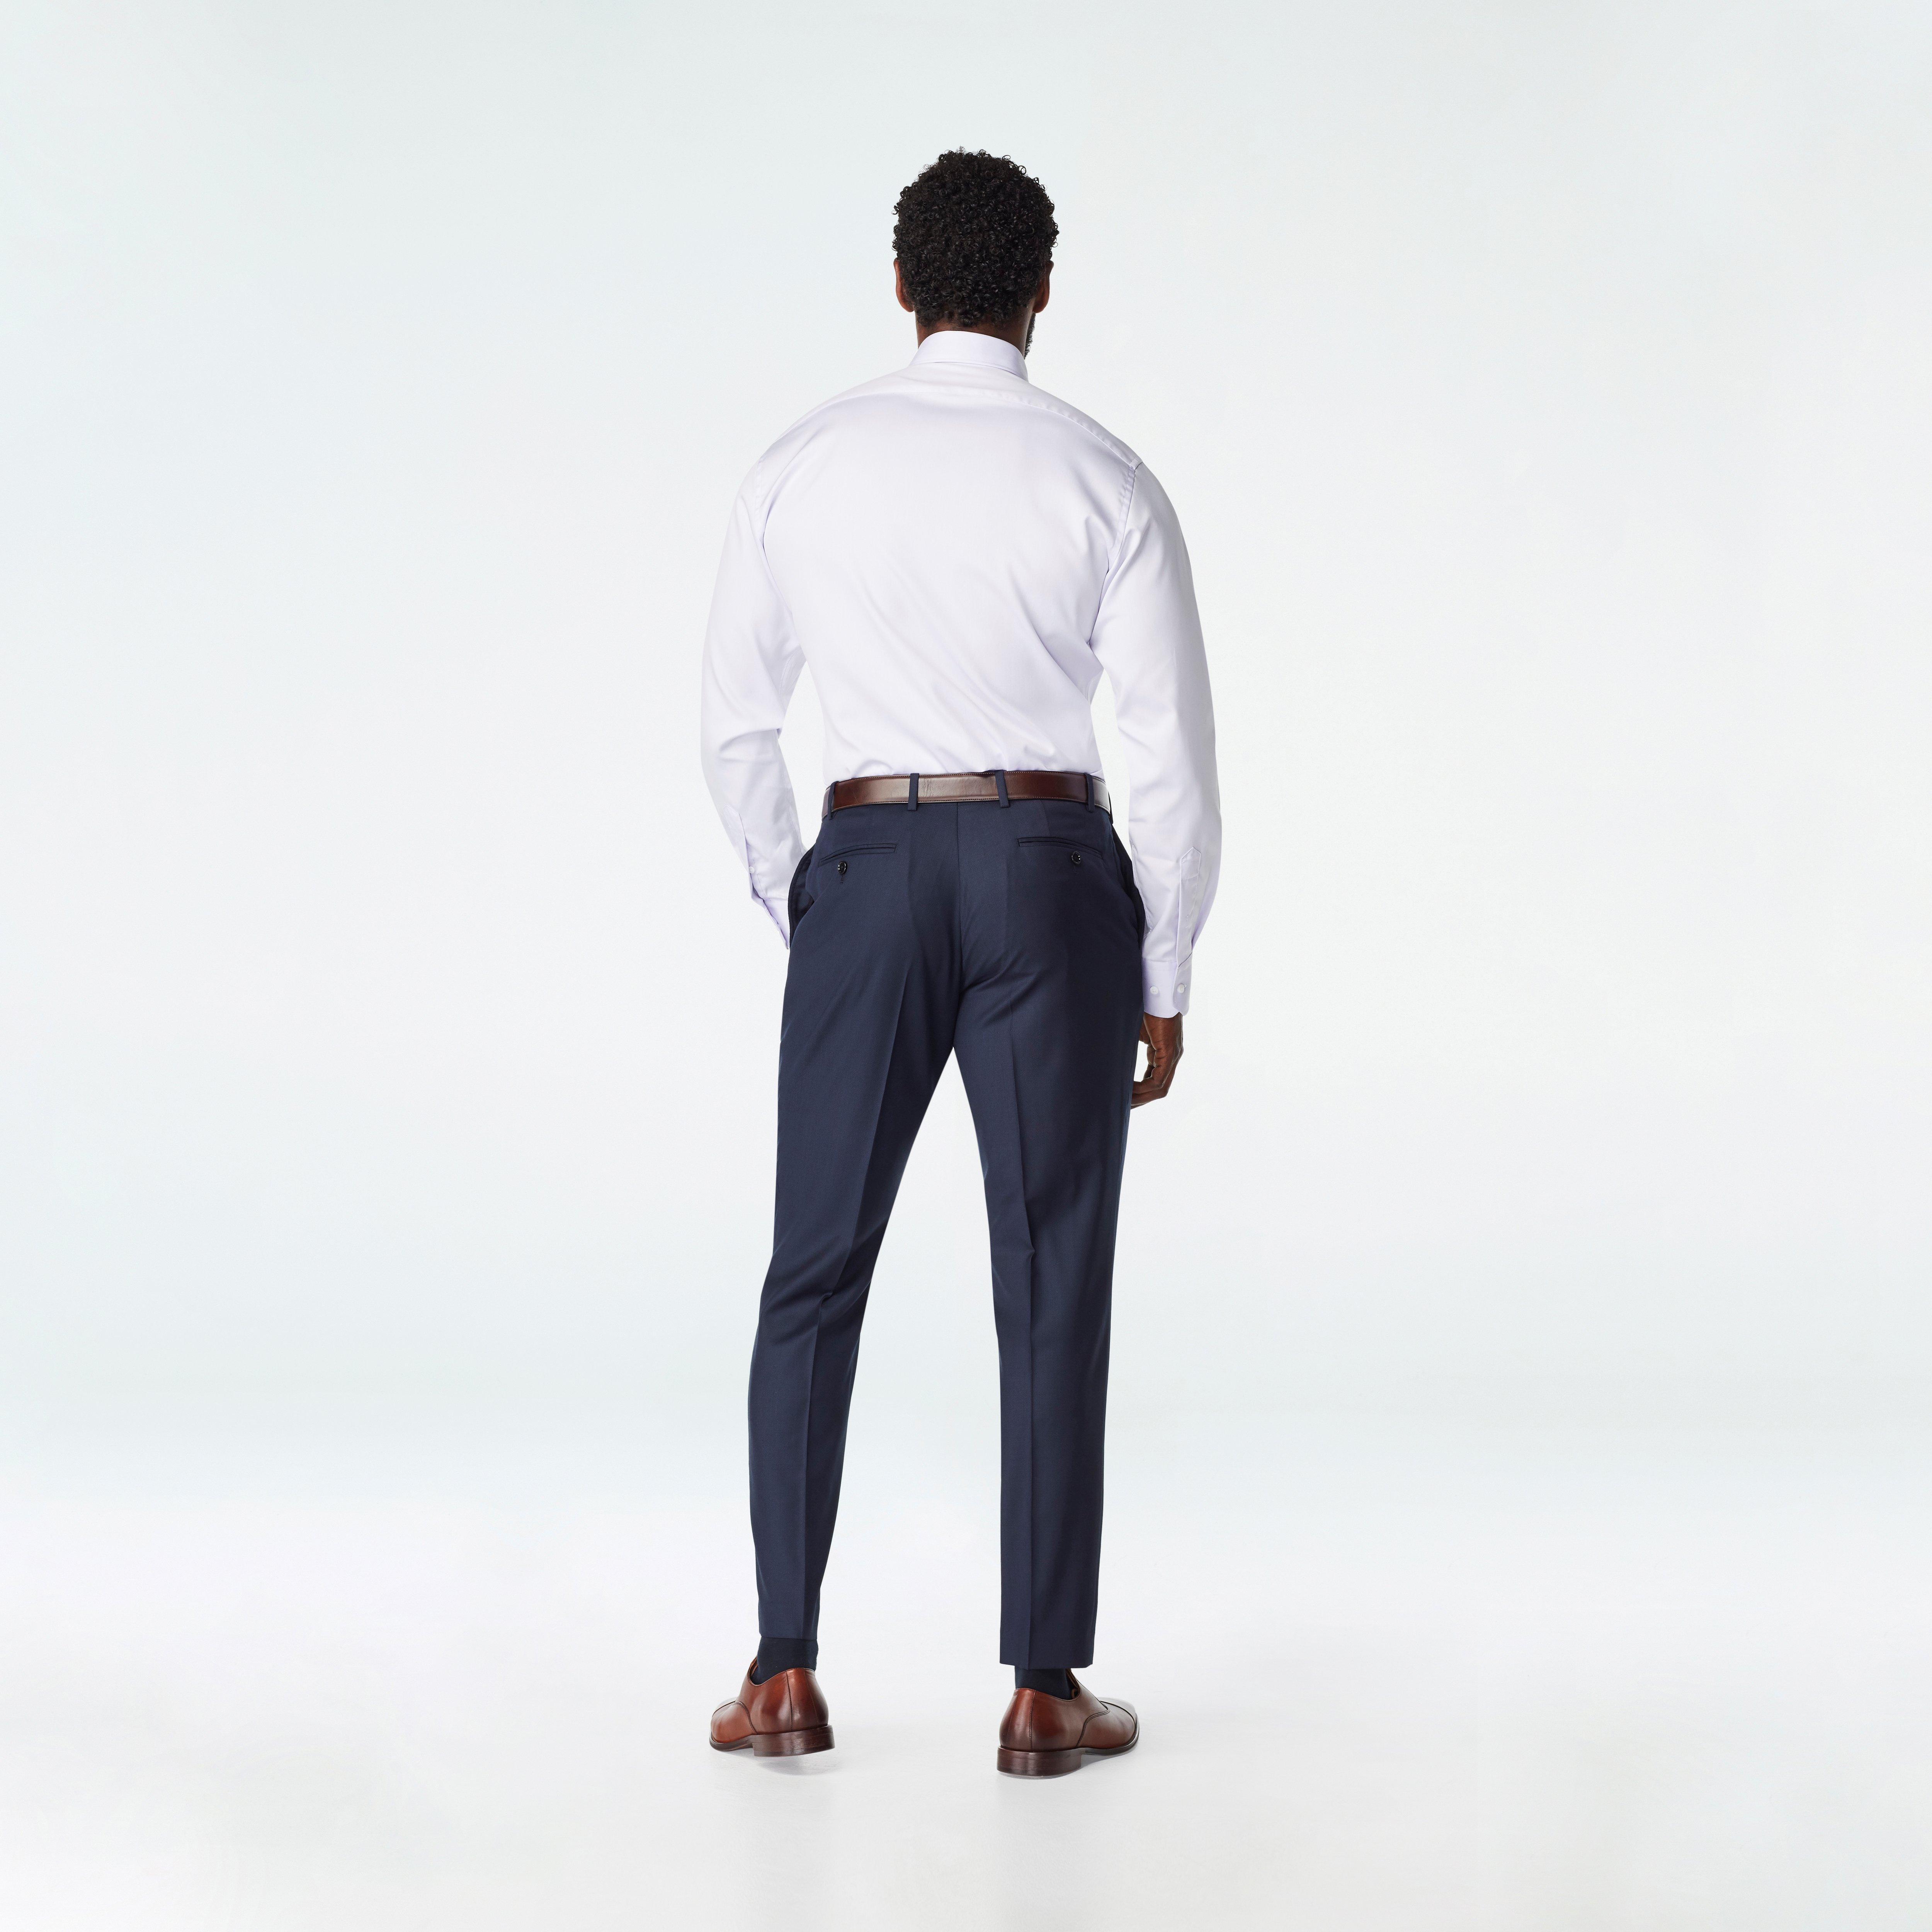 Custom Suits Made For You - Highbridge Nailhead Navy Suit | INDOCHINO